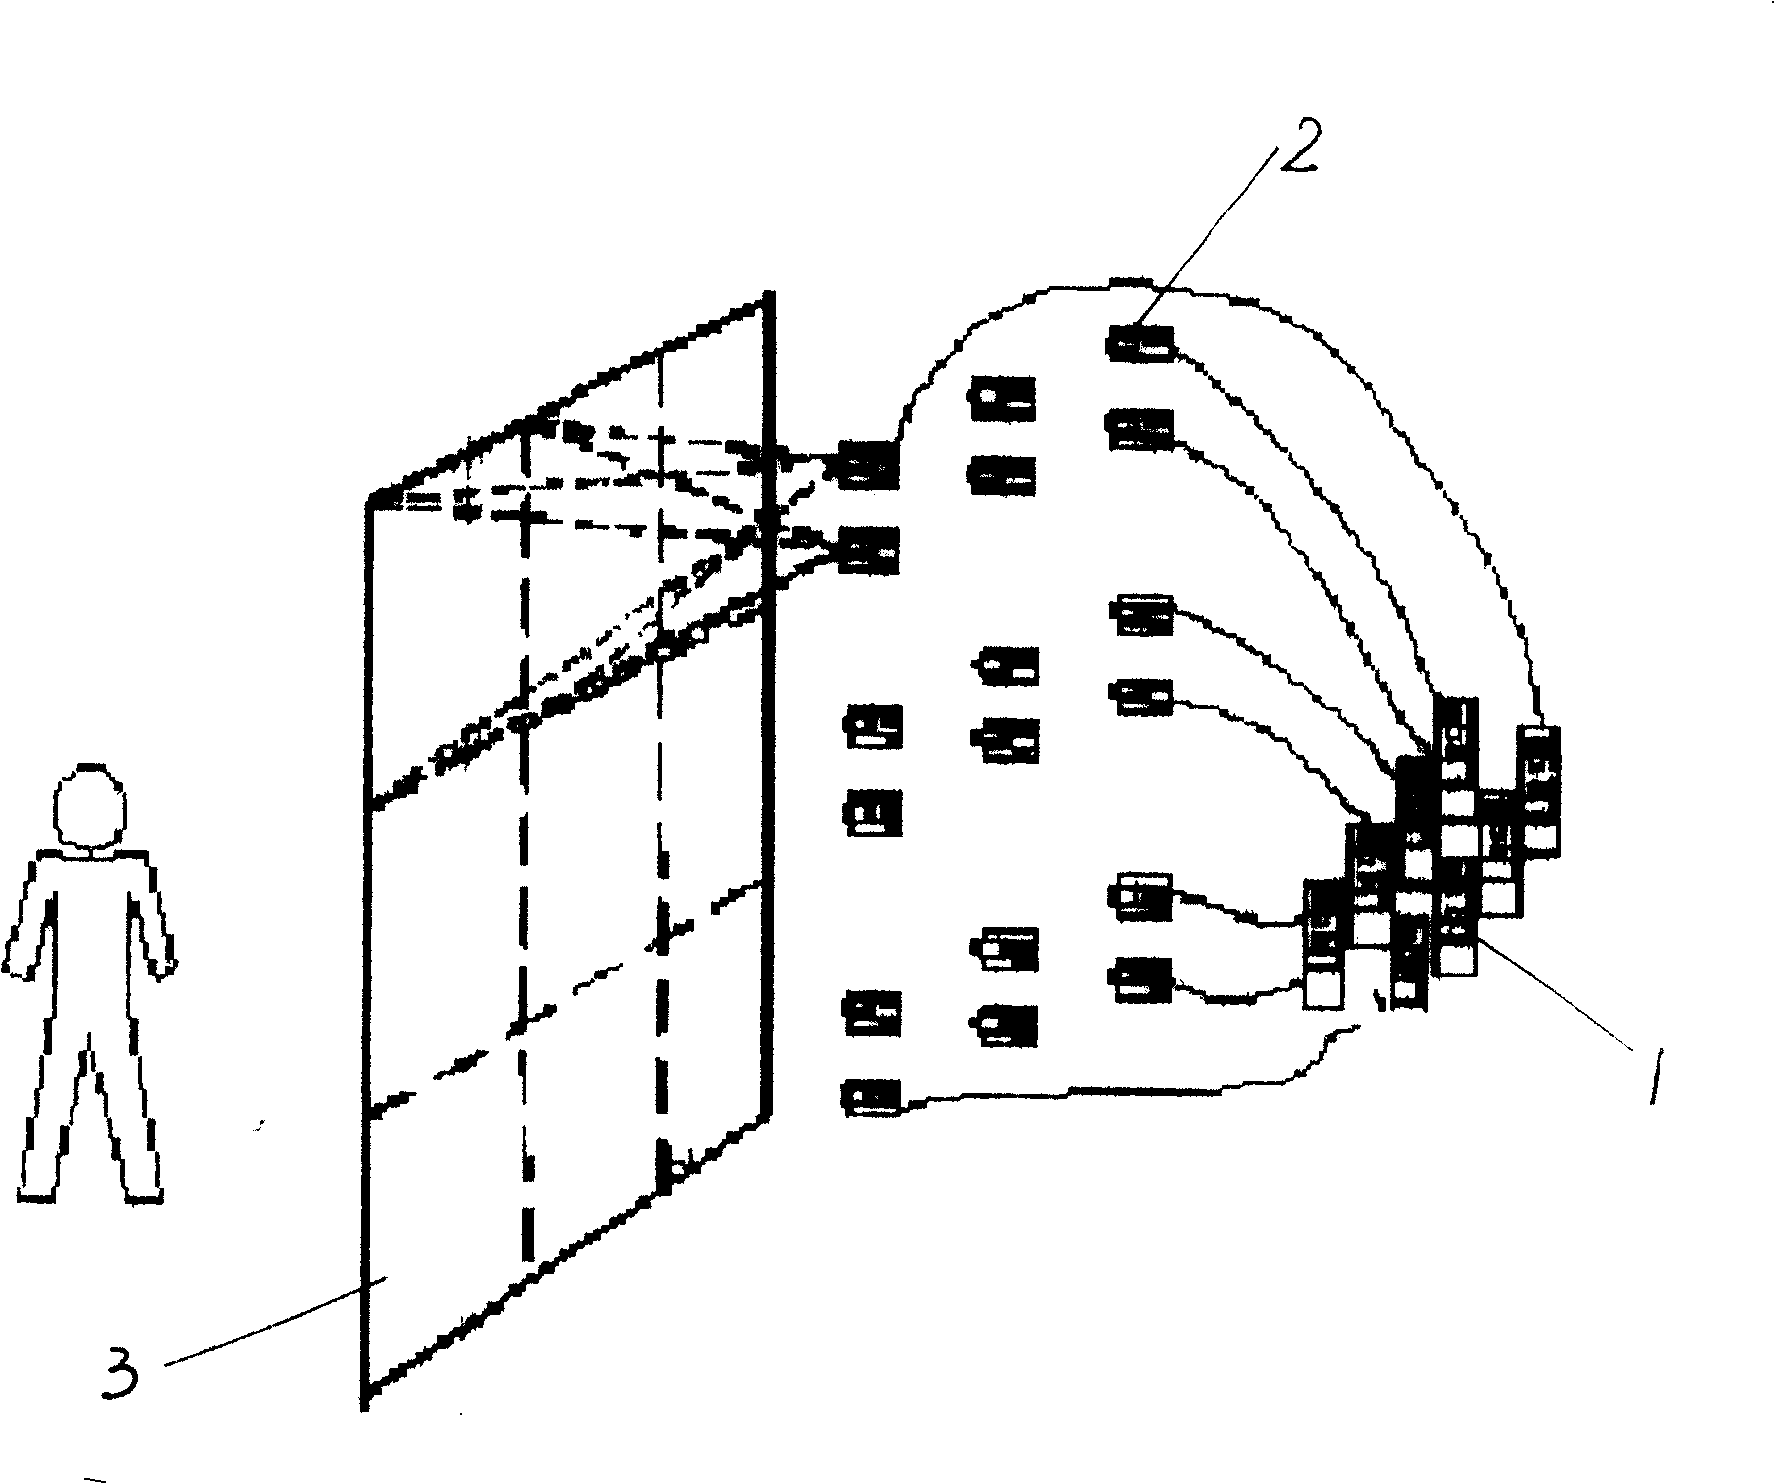 Correcting method for large-scale 3D spliced display wall